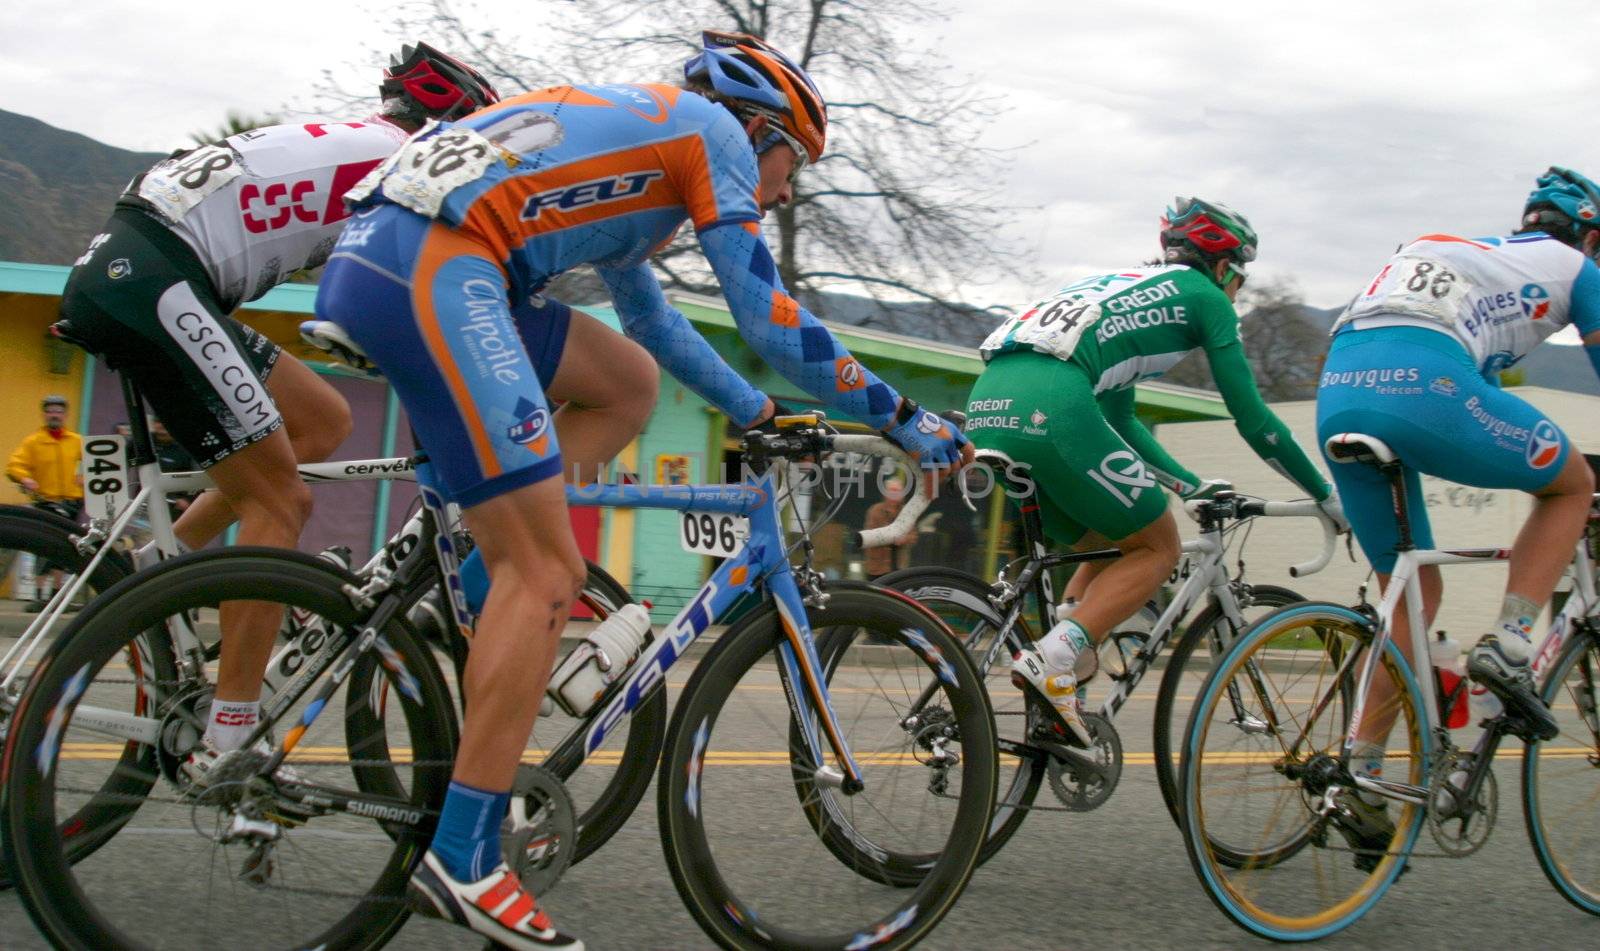 2008 Amgen Tour Of California is one of the biggest, if not the biggest, bike races in California. This is stage 6 going through the tourist town of Ojai.